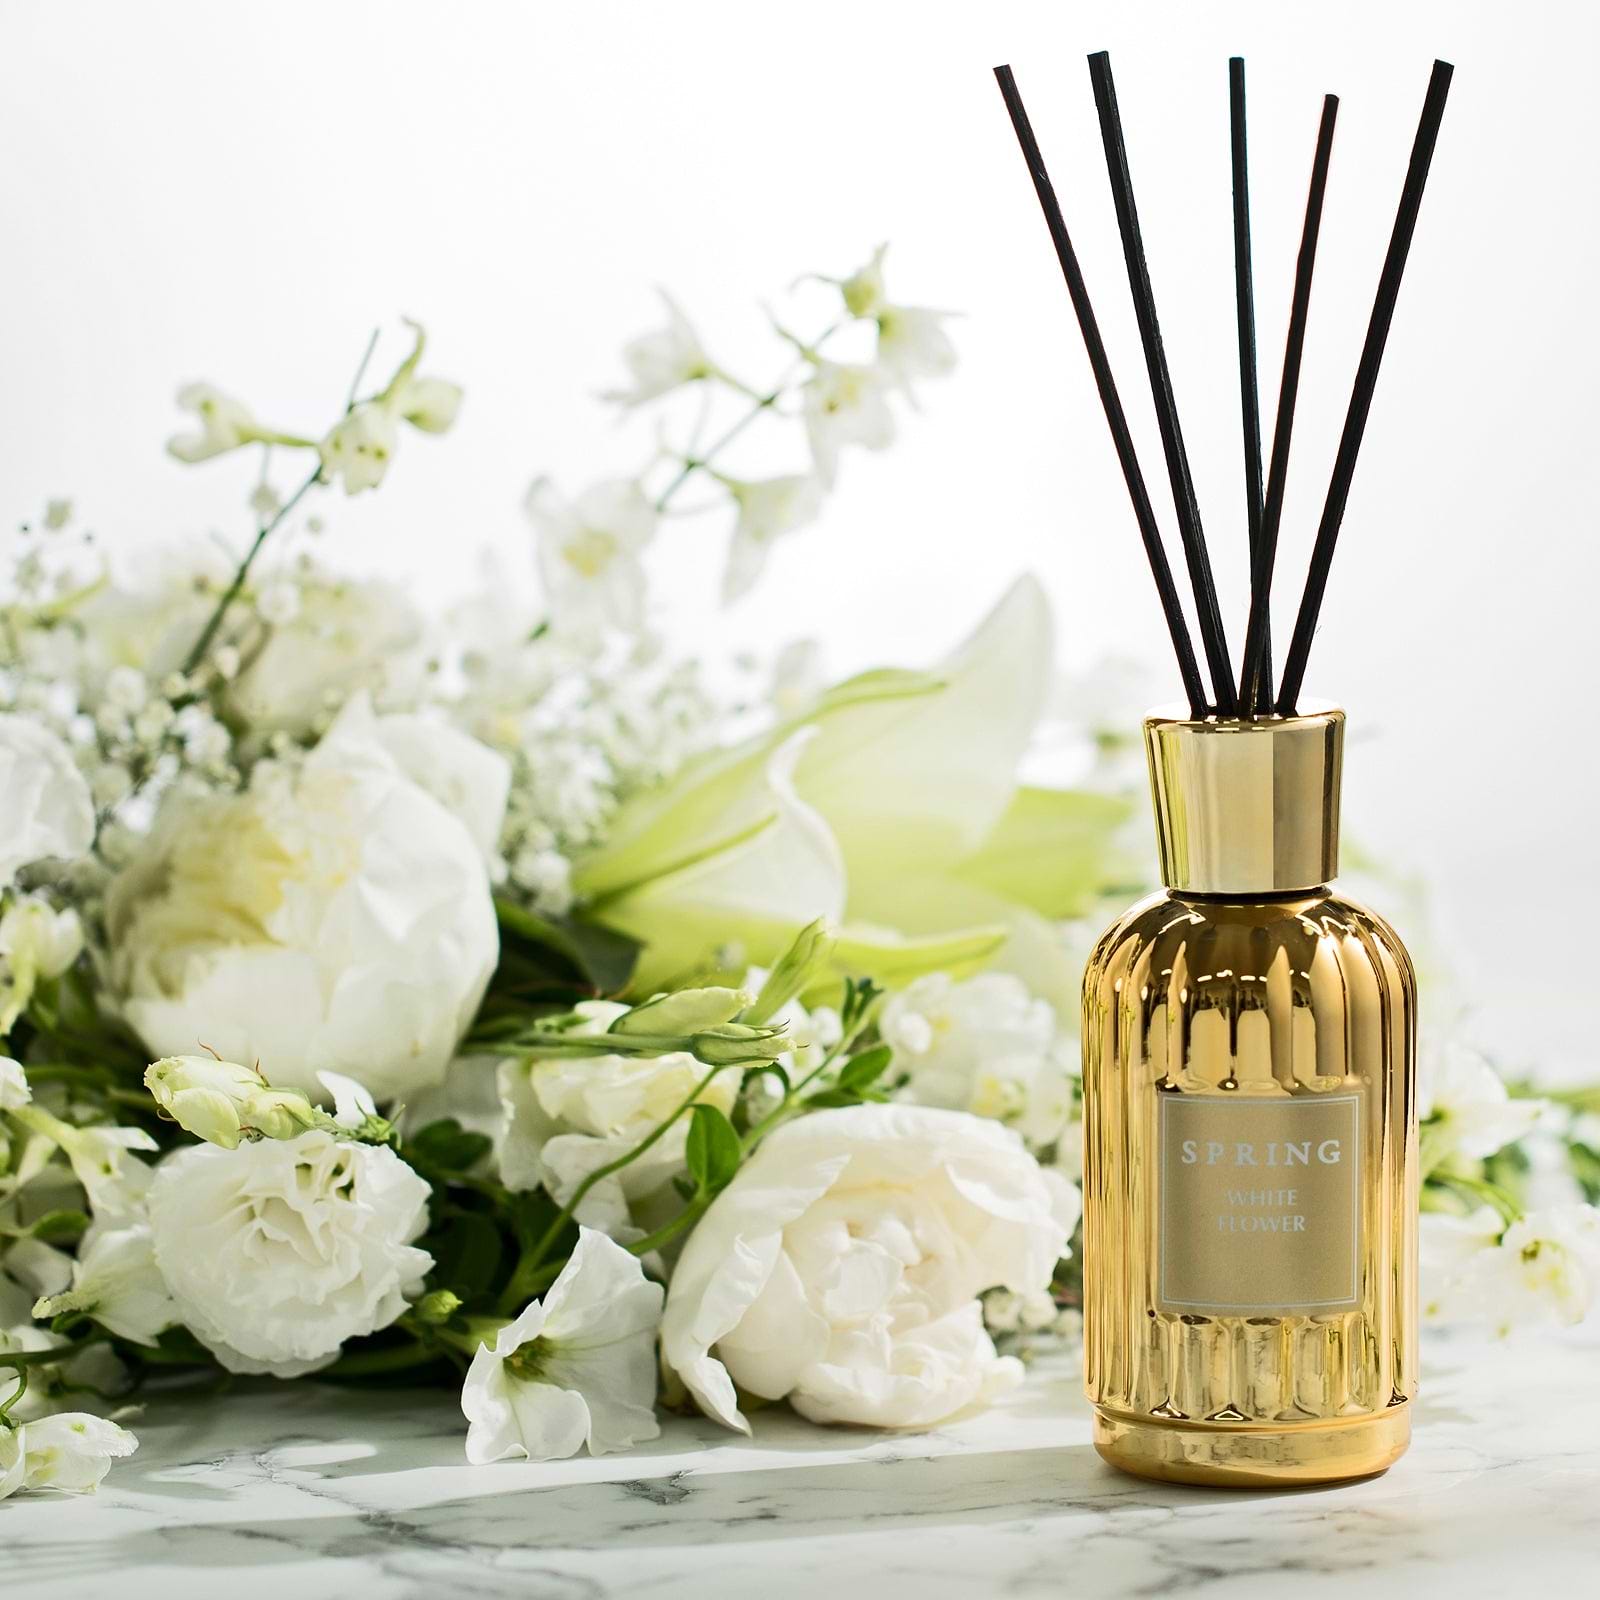 SPRING Fragrance Reed Diffuser Set | 6.1 oz (180ml) | Fragrance Made in France | Home Décor | Scented Aromatic Oil | Room Air Freshener White Flower | Alcohol + Ethanol free and VOC Compliant